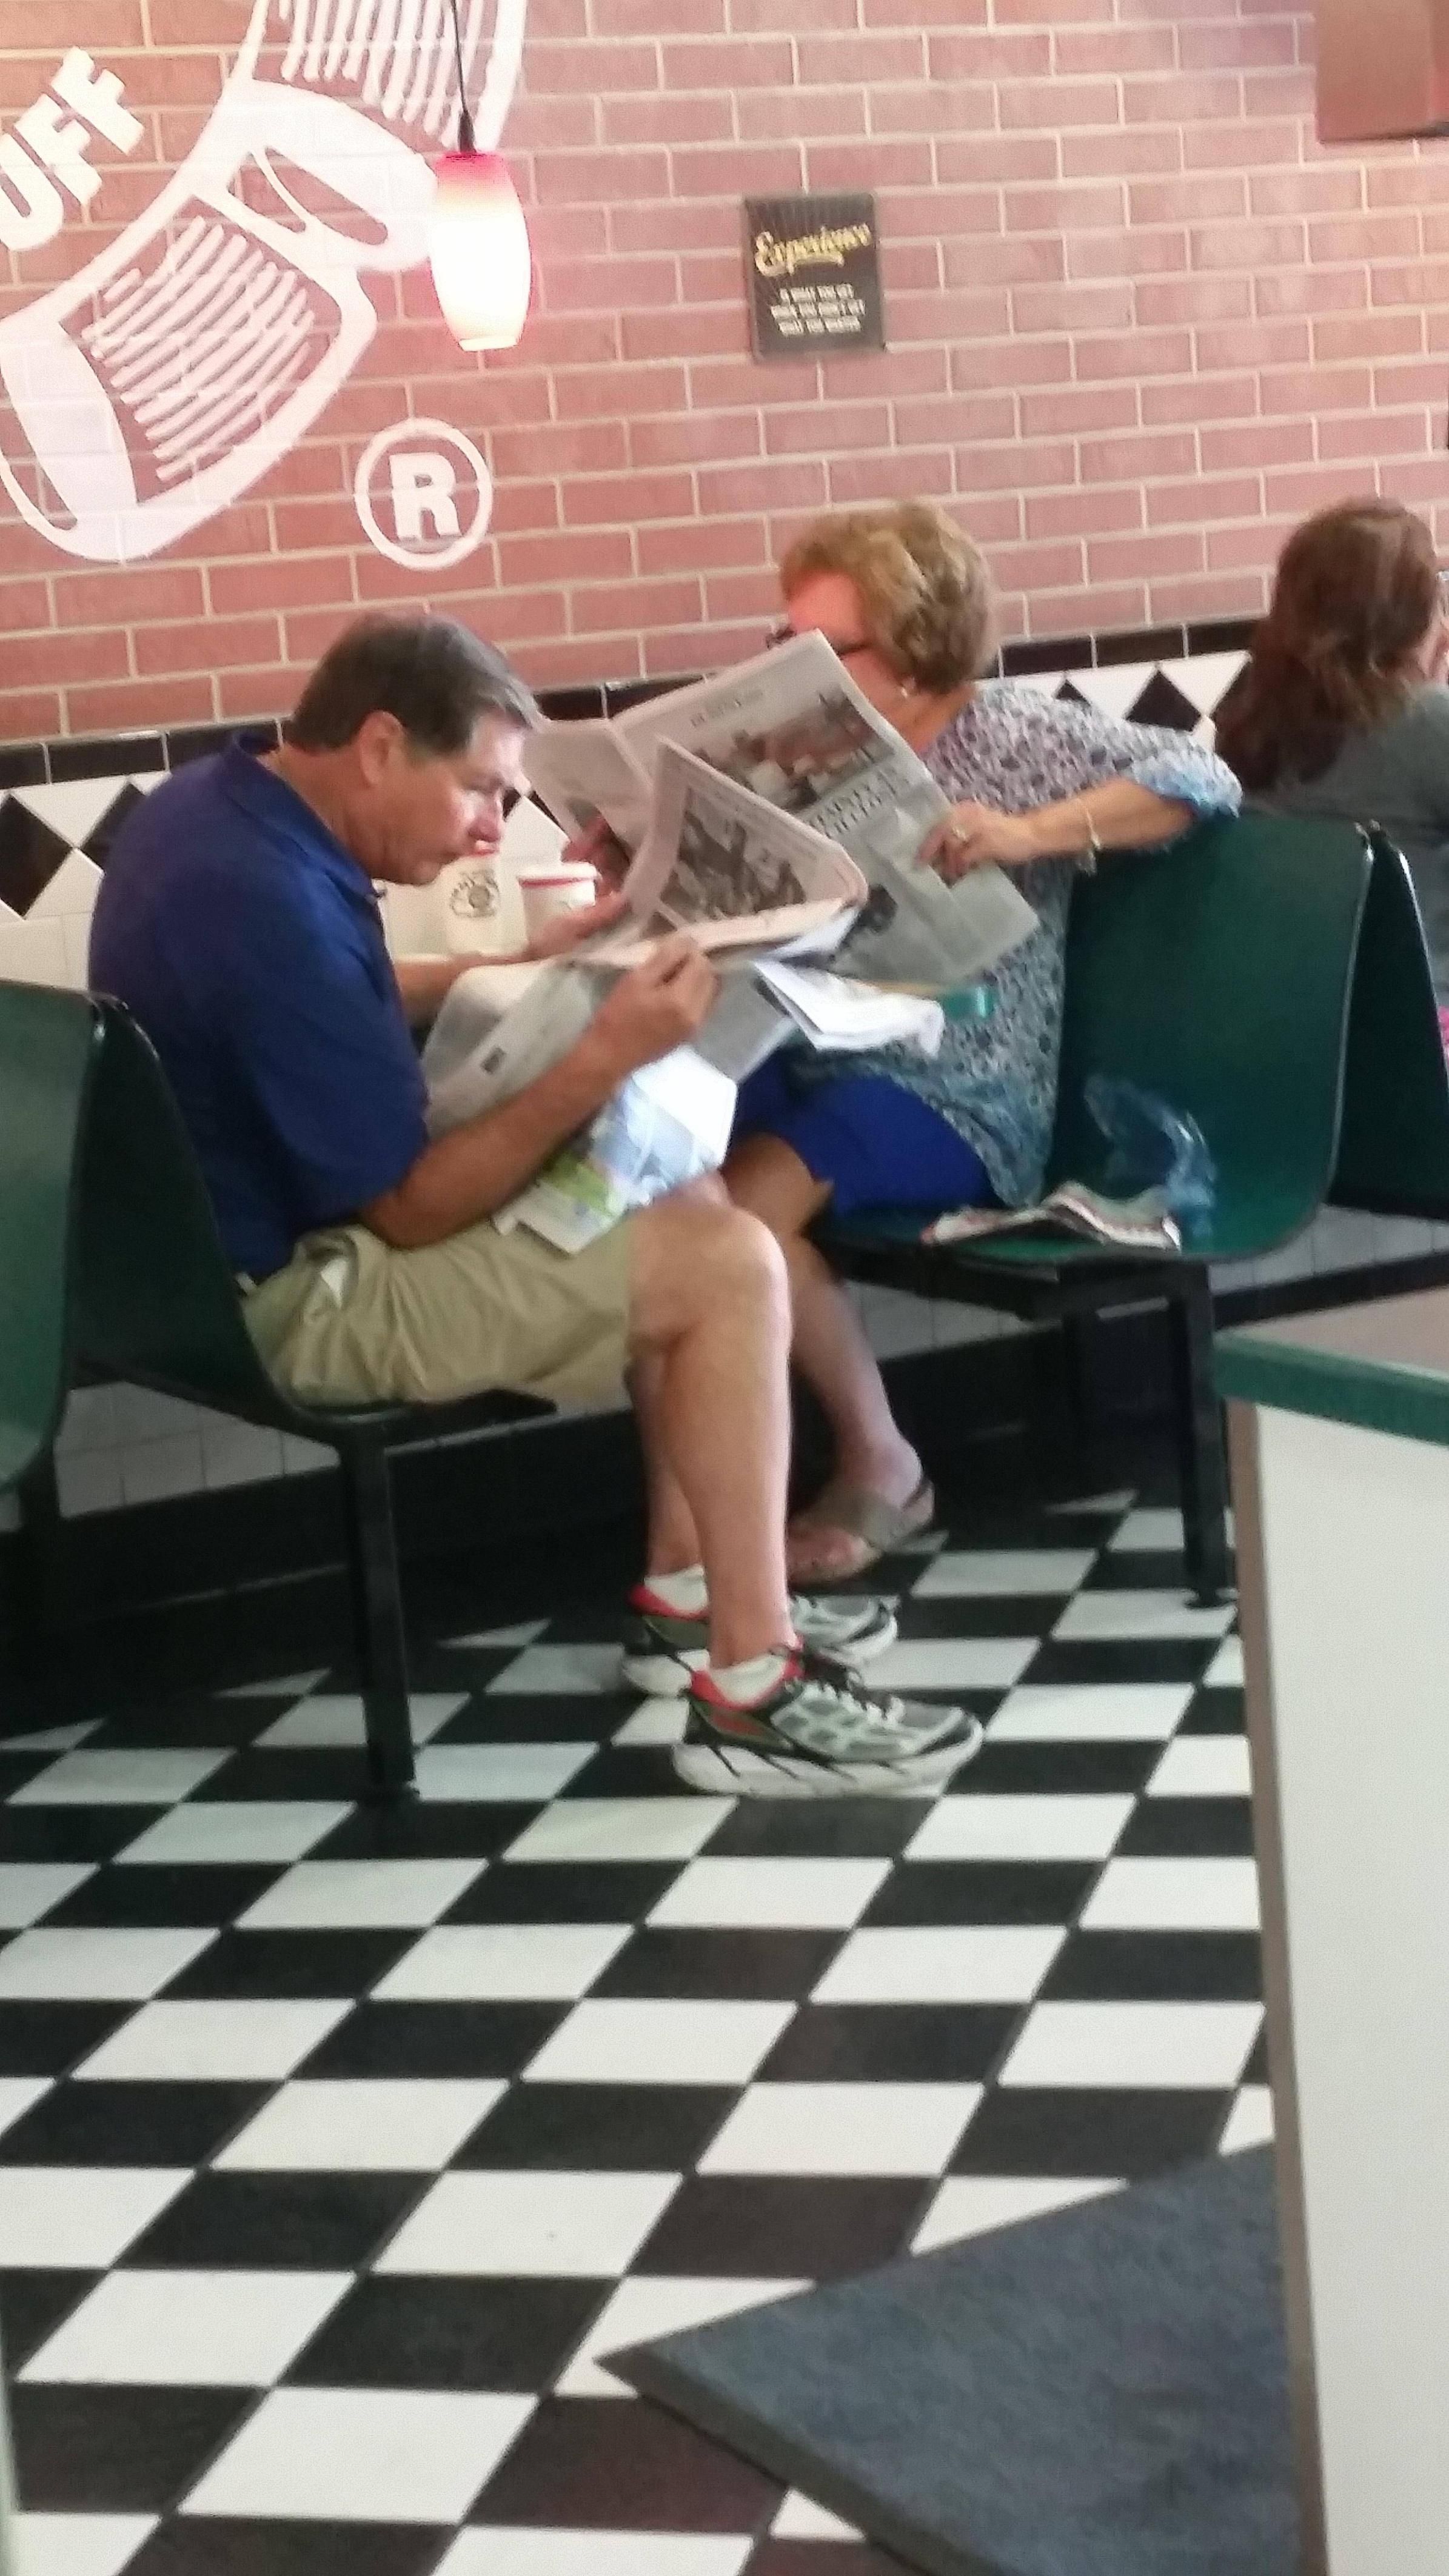 Well, at least they aren't on their phones...